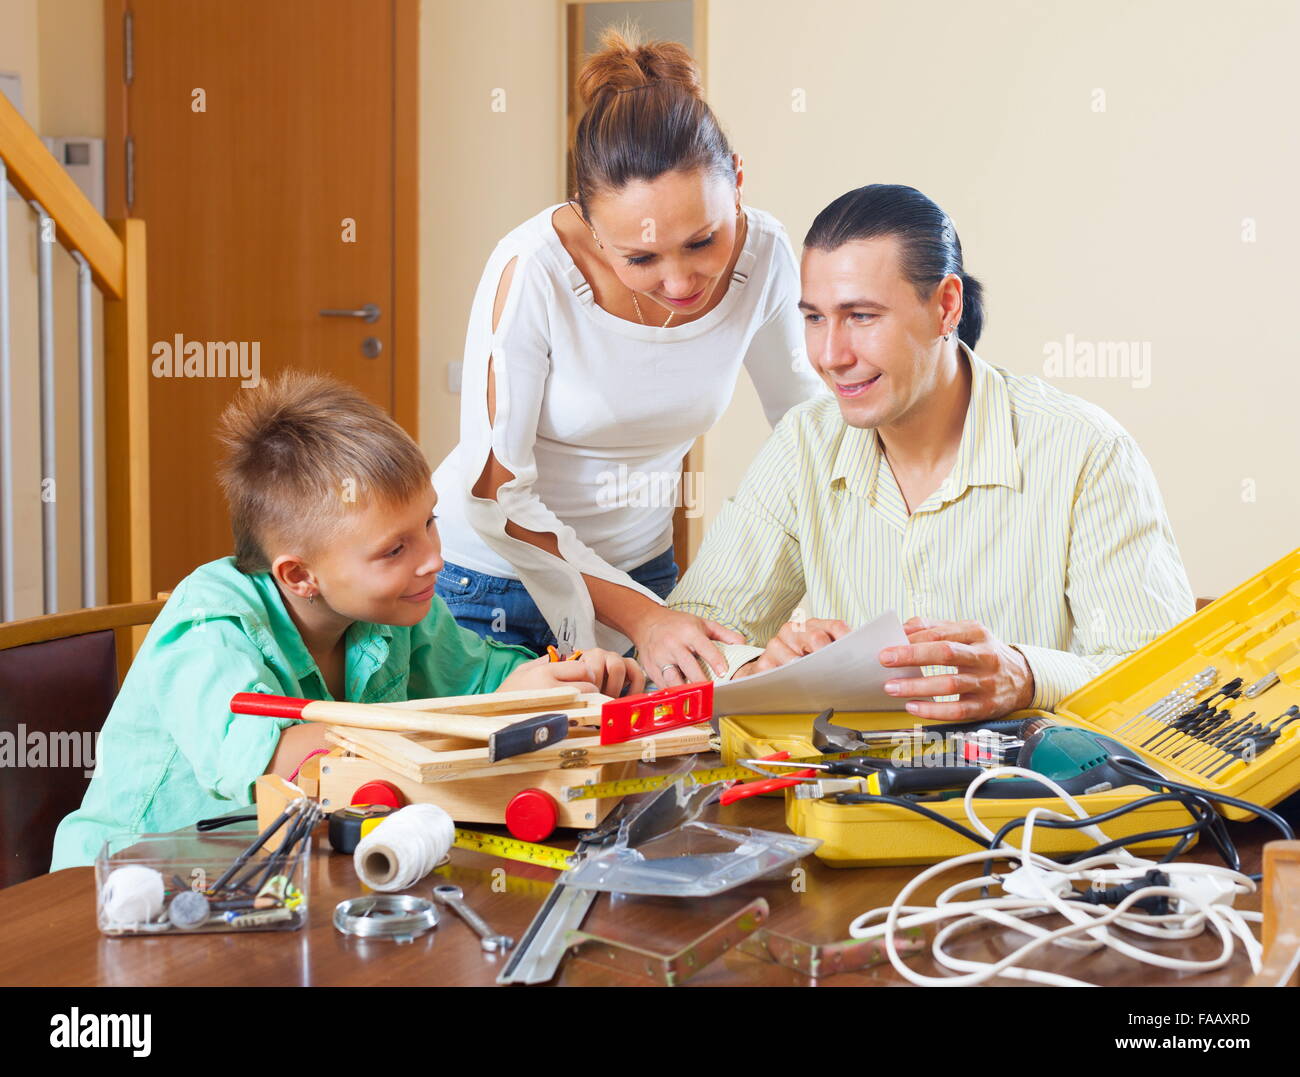 Happy family of three with teenager son doing something with the working tools Stock Photo